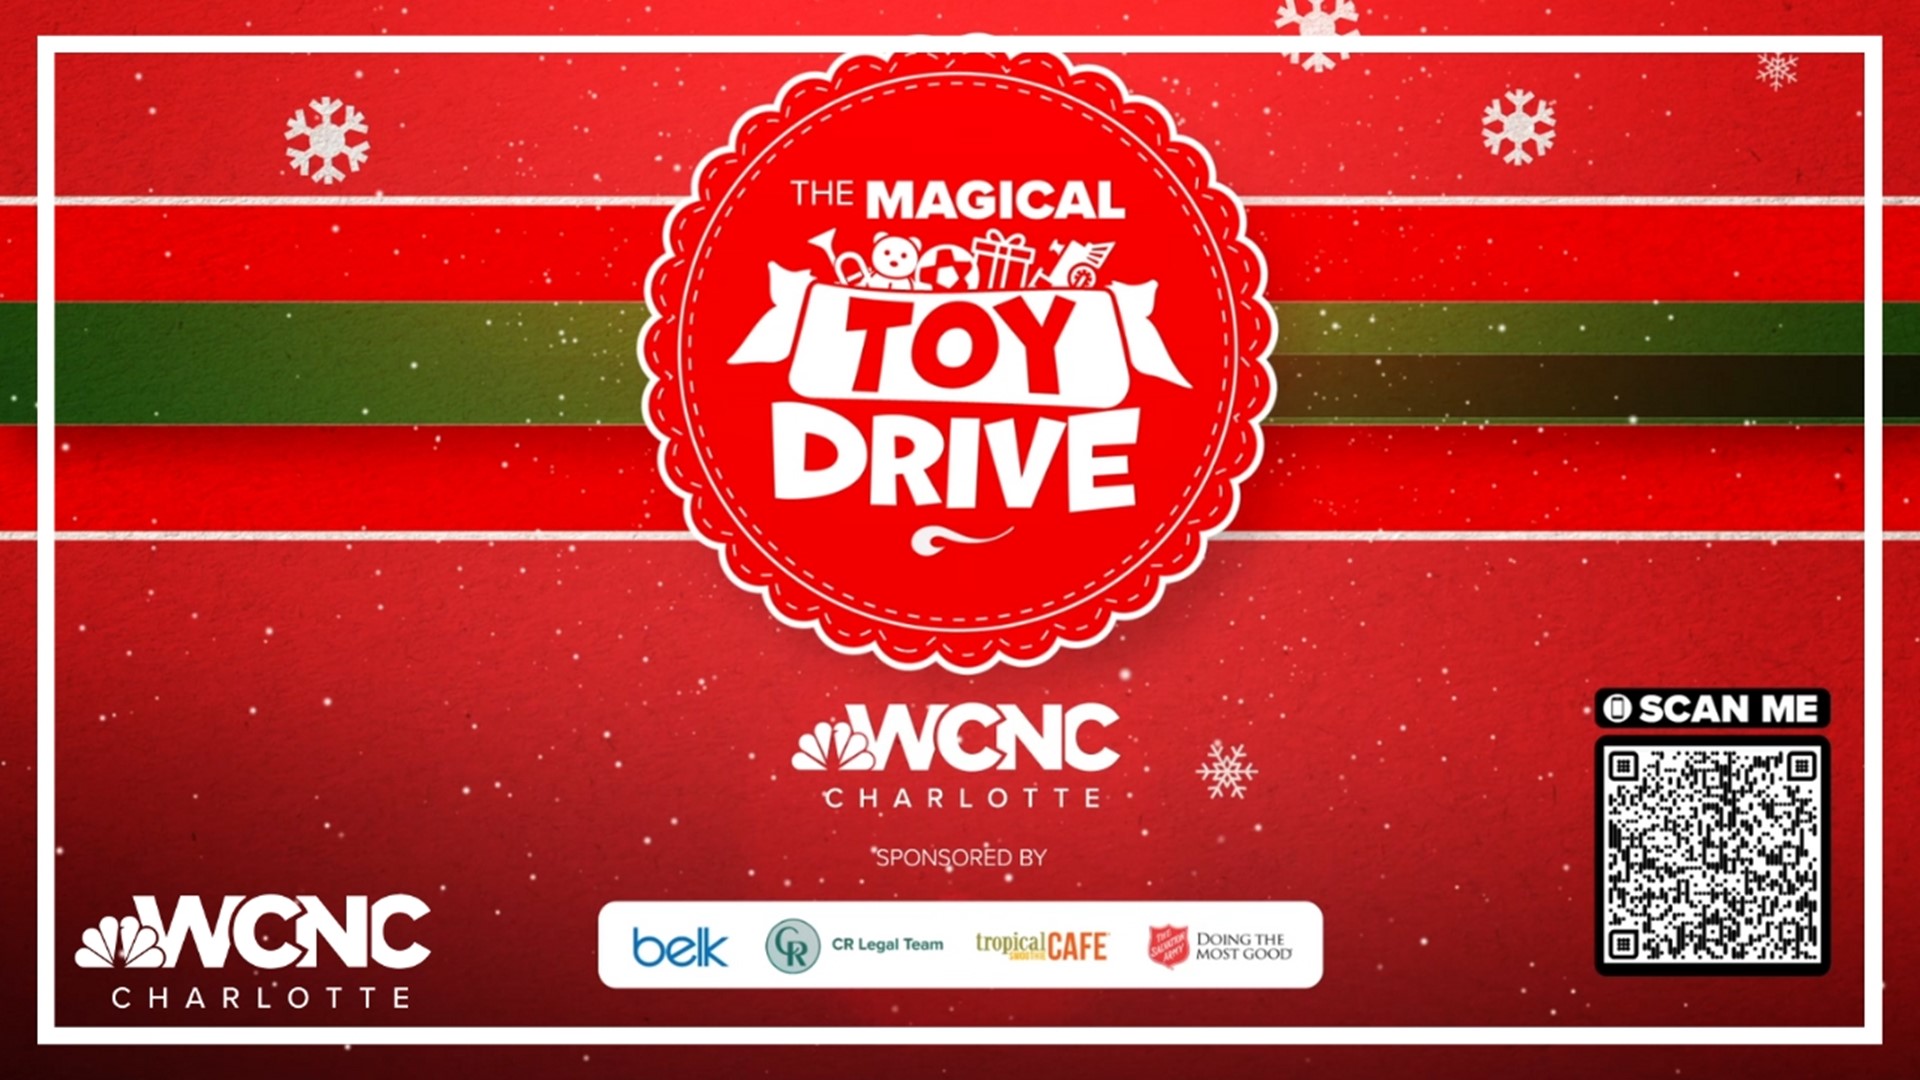 Today marks the beginning of our annual magical toy drive. We hope you'll make a difference and make sure every kid is able to get gifts for the holiday season.